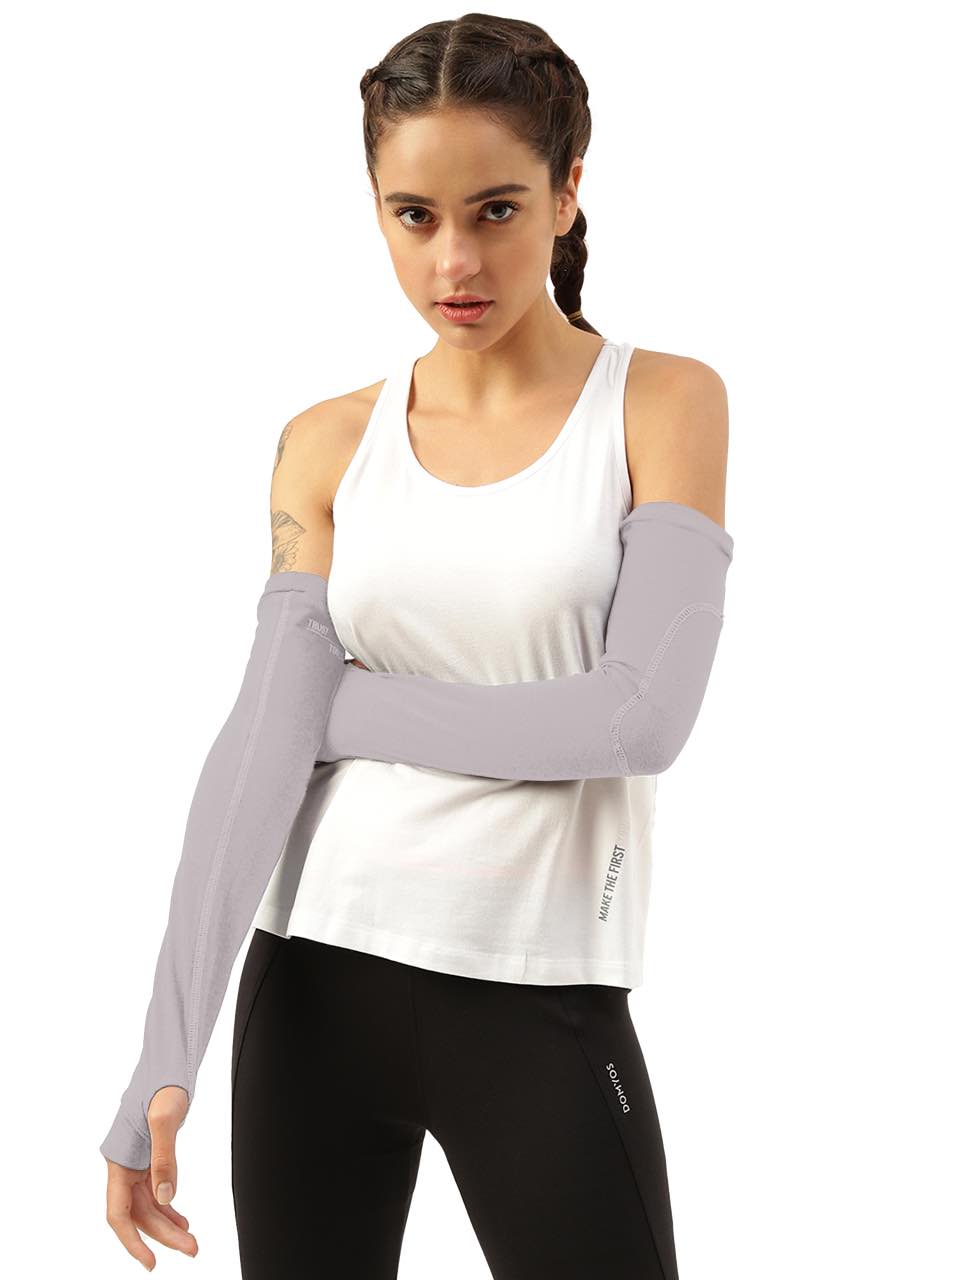 Unisex White Arm Sleeves (Pack of 2)